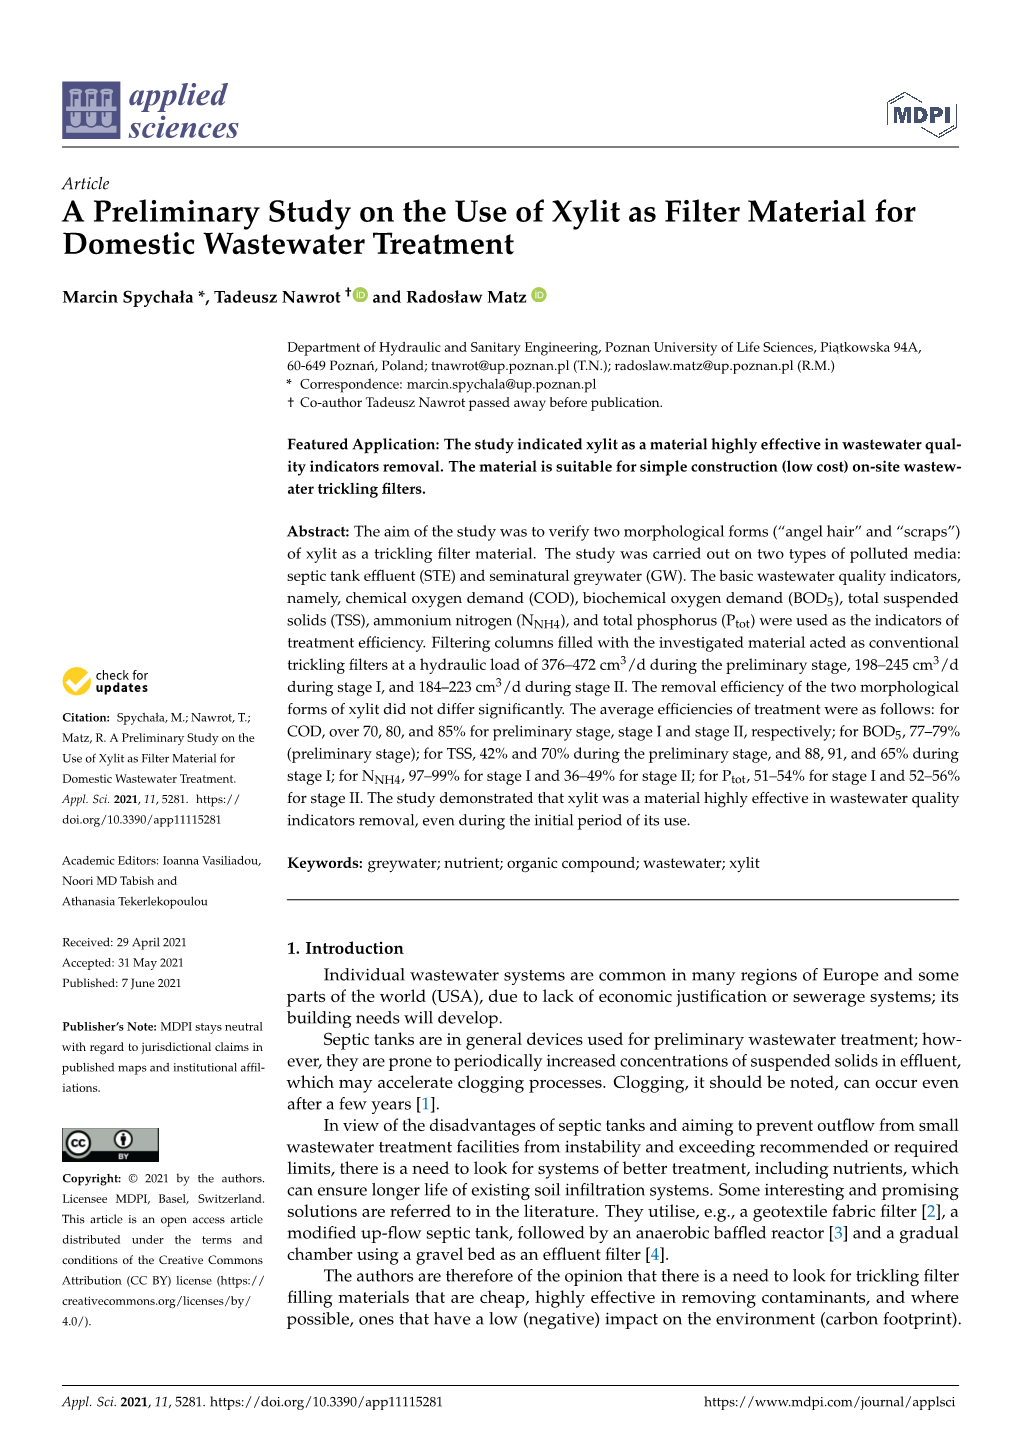 A Preliminary Study on the Use of Xylit As Filter Material for Domestic Wastewater Treatment